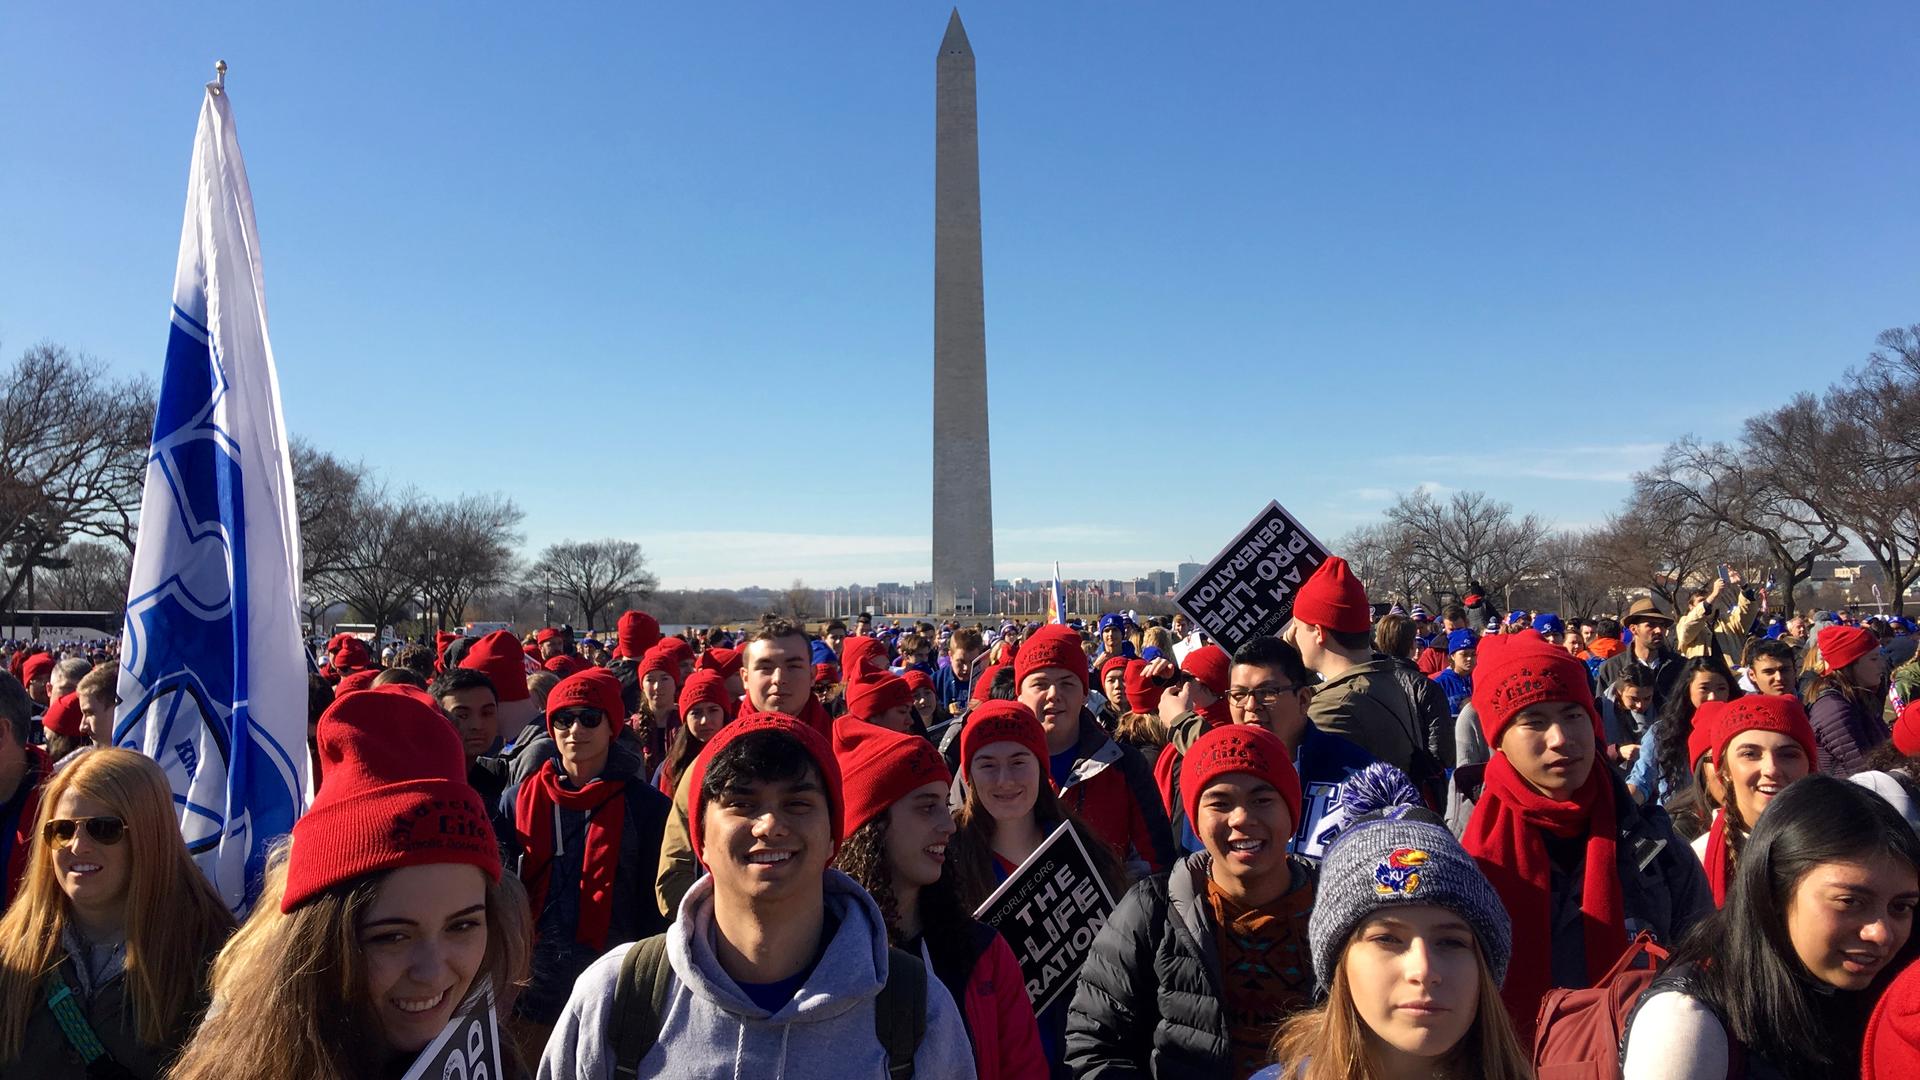 Catholic high school students from all over the country attended Friday's "March for Life" event in Washington, DC. This group from Kapaun Mt. Carmel Catholic High School in Wichita, Kansas took buses to be there. 